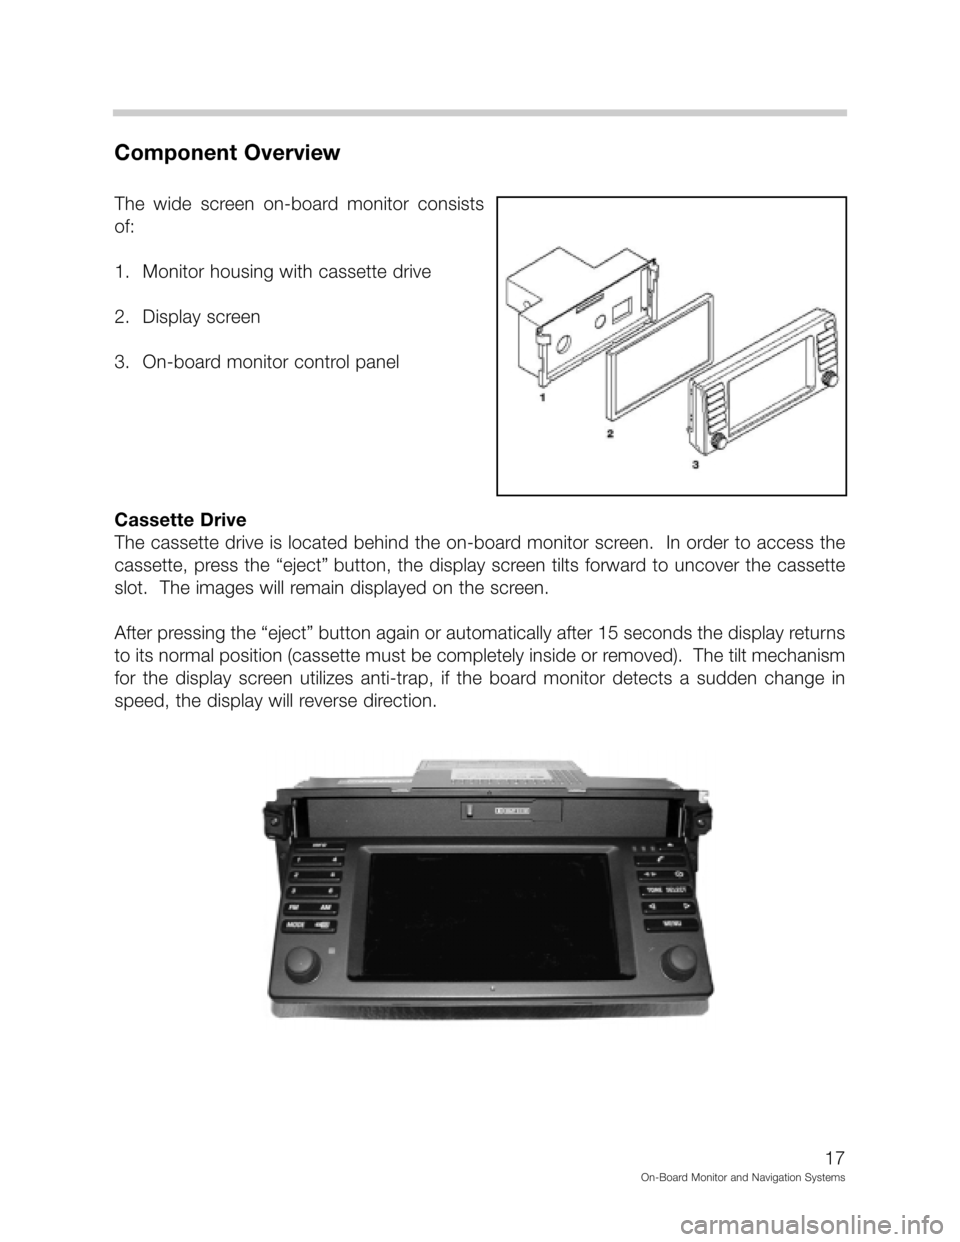 BMW 5 SERIES 1998 E39 On Board Monitor System User Guide *,



"&
(	
2./!!,, 7
# % 
 
 	
 


* 

%&
 

. 
	


